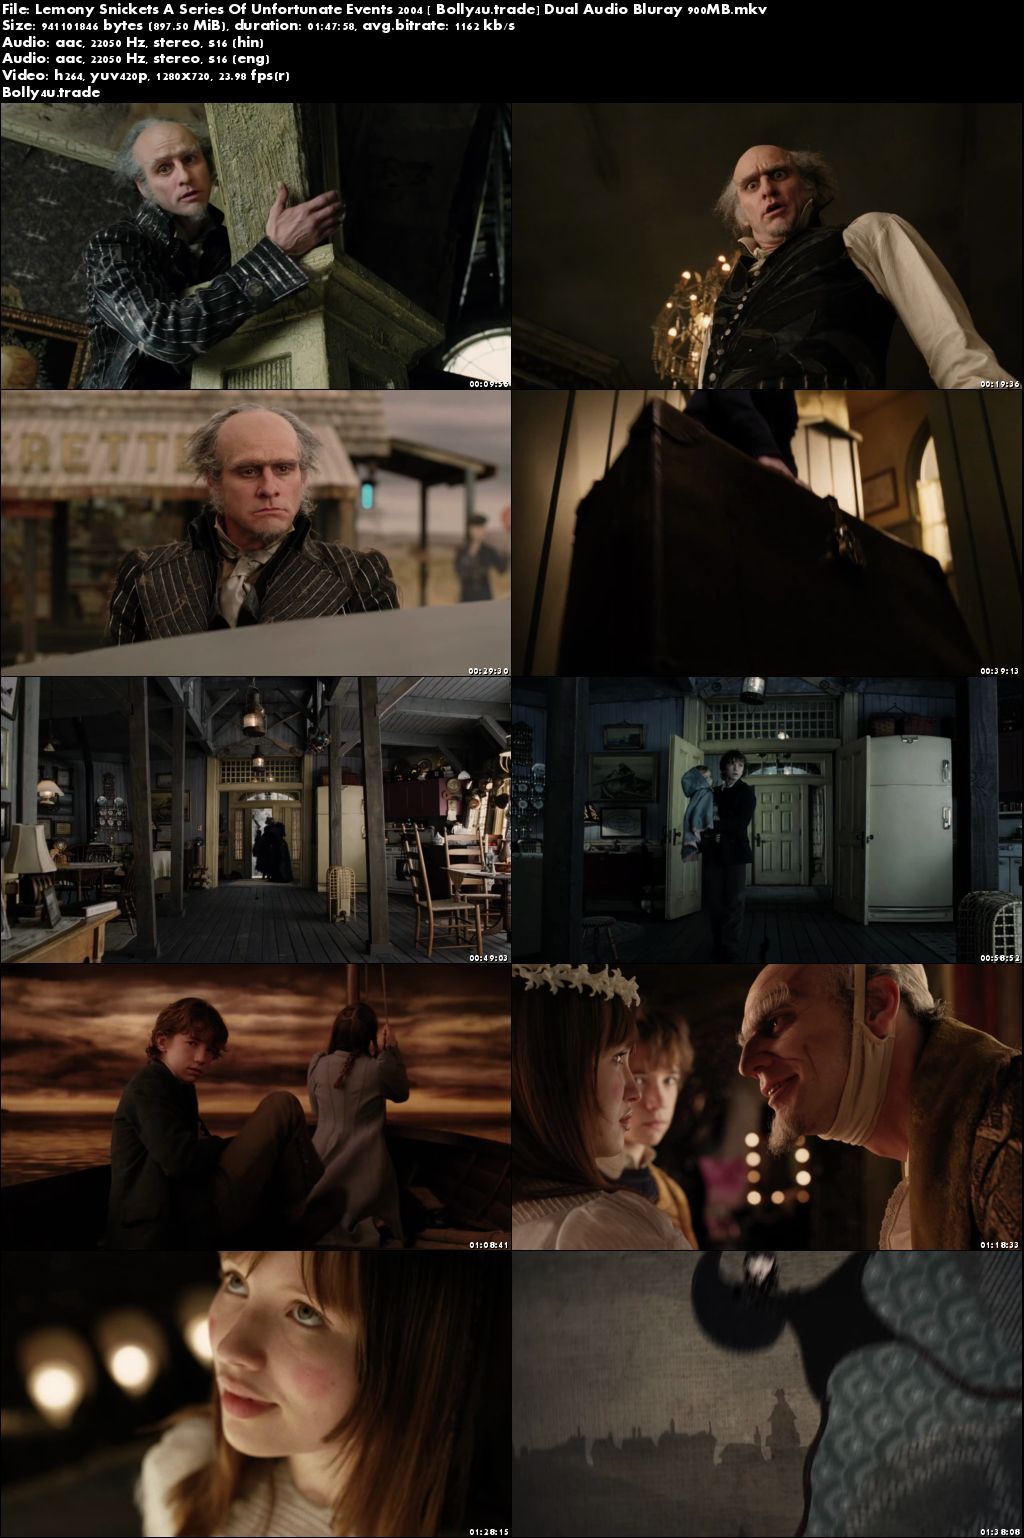 Lemony Snickets A Series Of Unfortunate Events 2004 BRRip 900Mb Hindi Dual Audio 720p Download